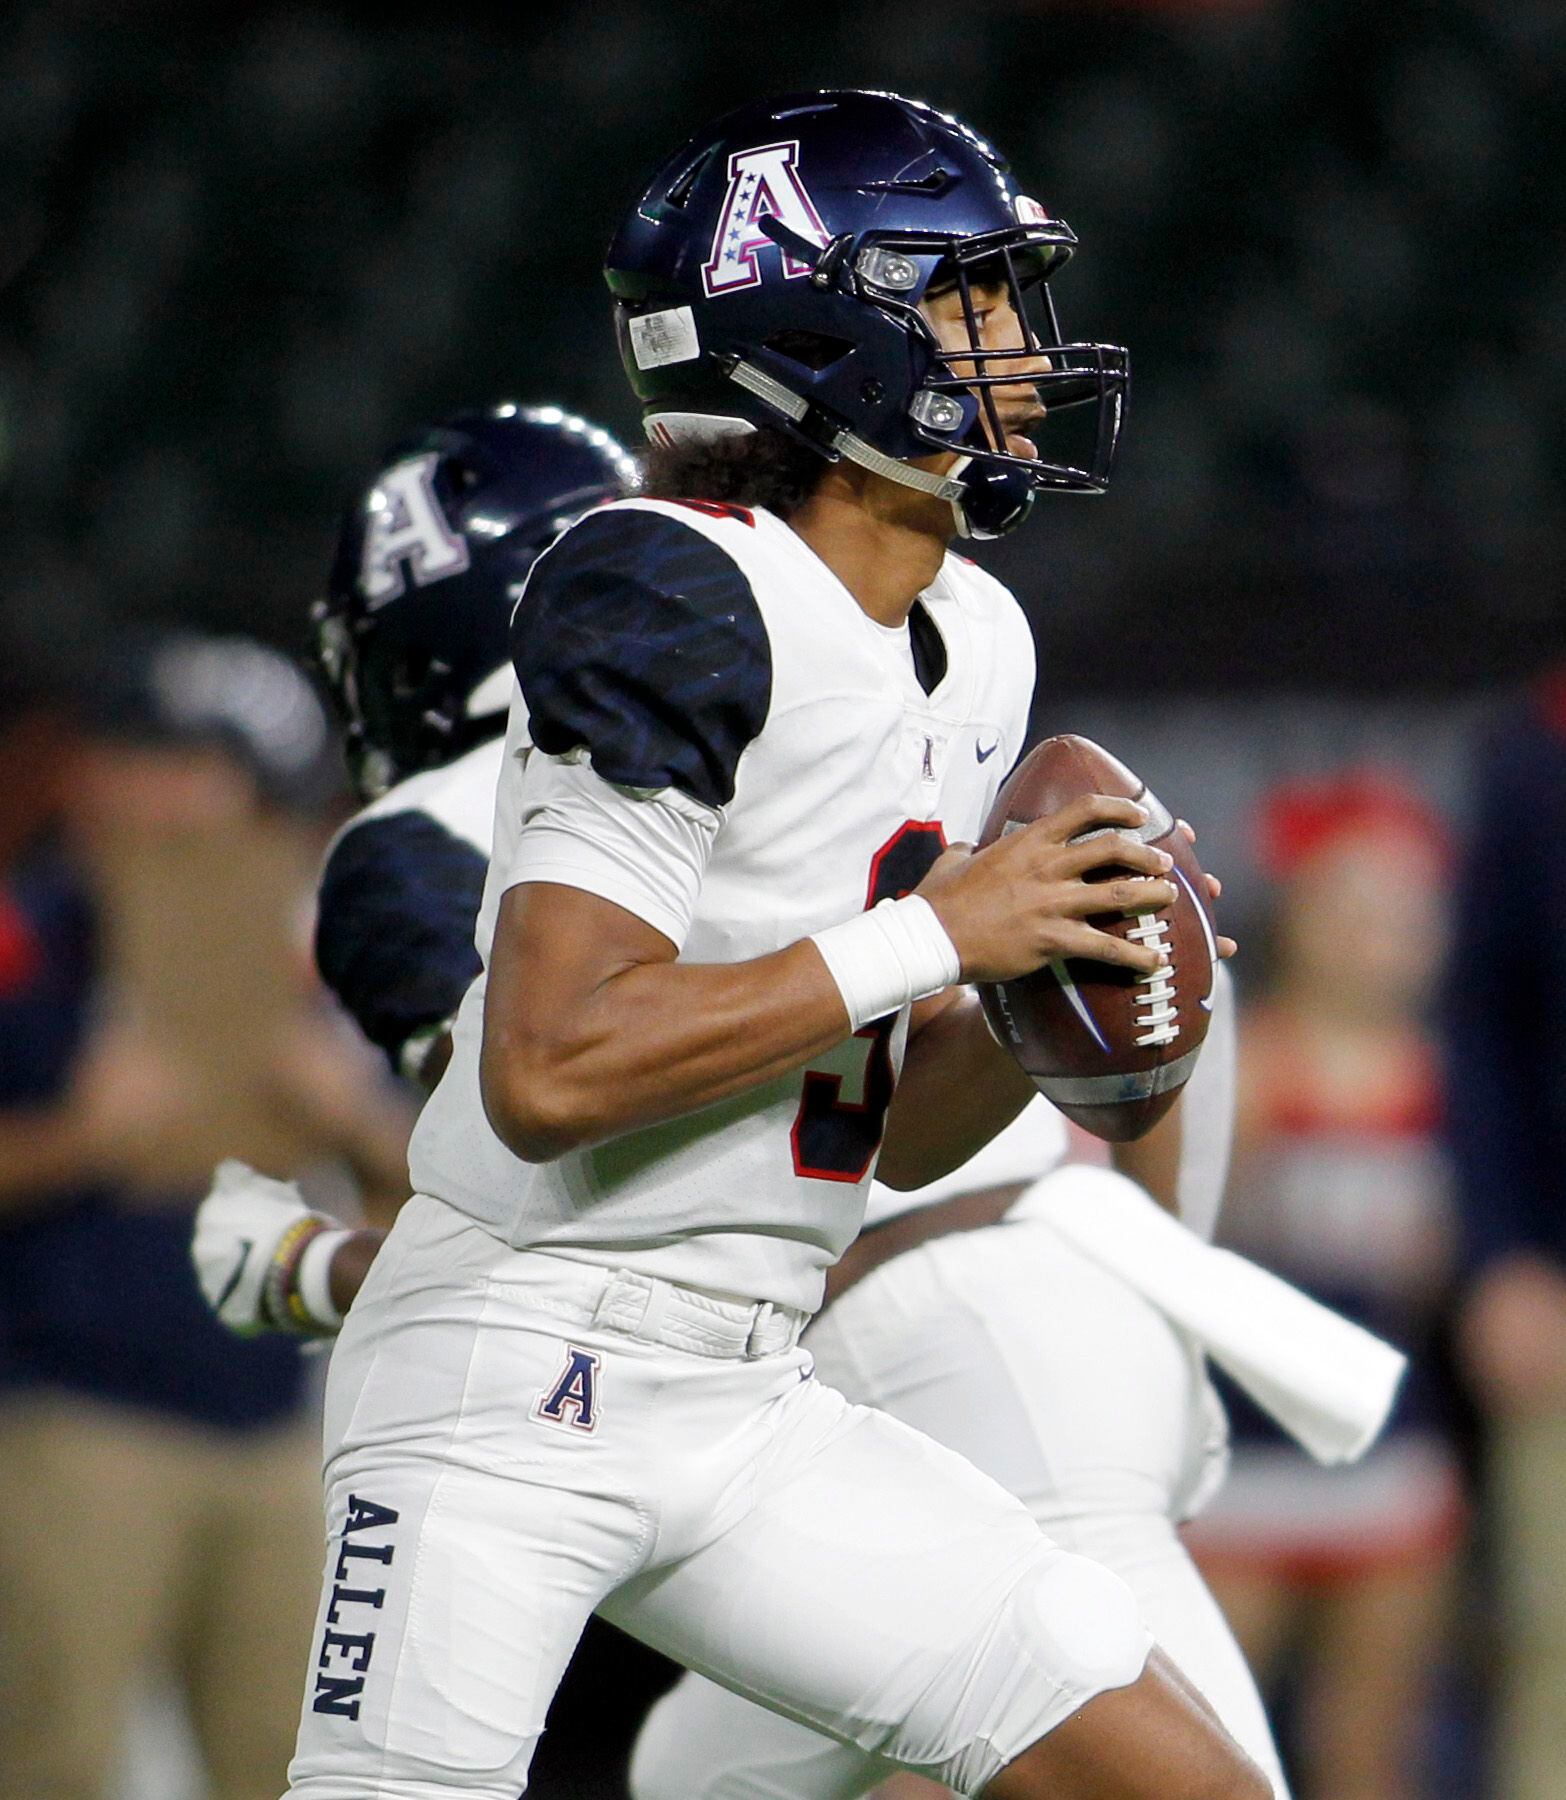 Allen quarterback Mike Hawkins (3) drops back to pass during 2nd quarter action against Lake...